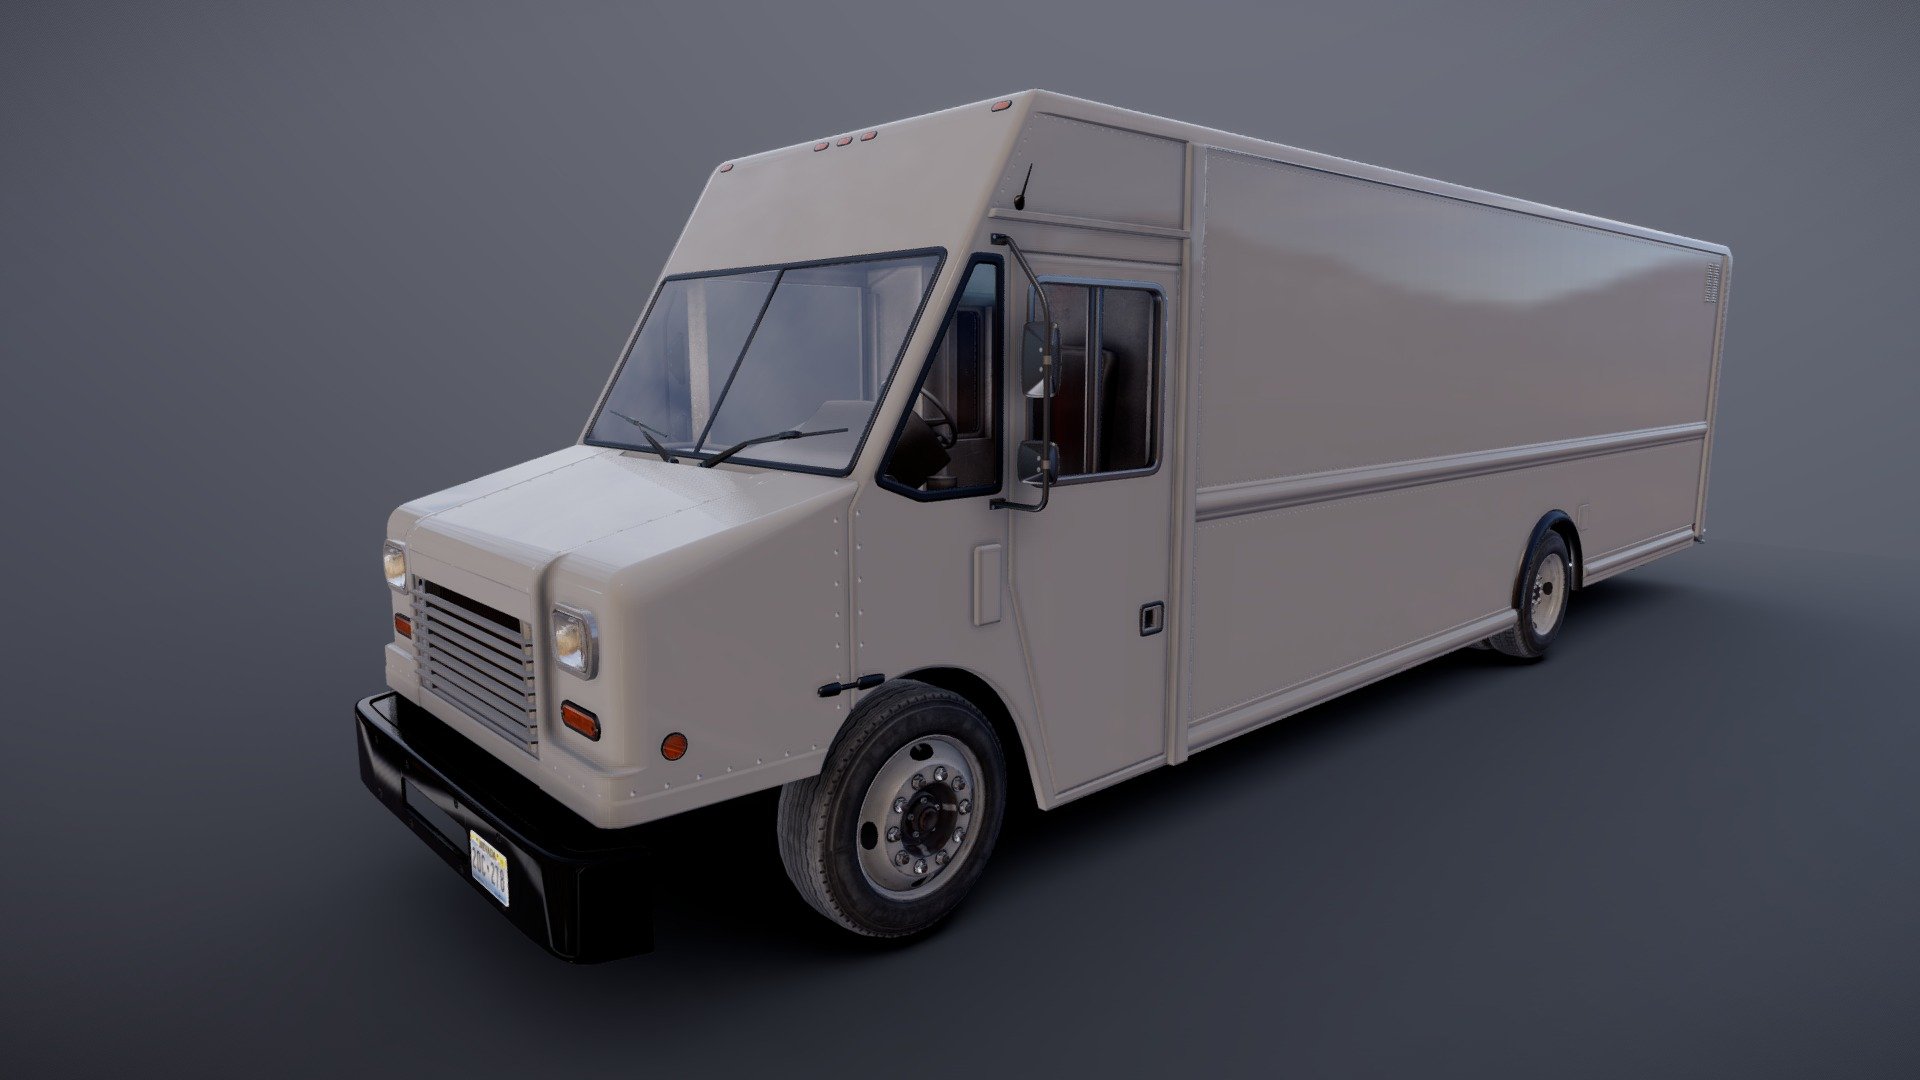 Freightliner P1200 step van game ready model.

Full textured model with clean topology.

High accuracy exterior model.

High detailed cabin - seams, rivets, chrome parts, wipers.

Side and back doors are openable.

Hood logo are separate object with own texture.

Lowpoly interior - 4404 tris 2960 verts

Full model - 44232 tris 27069 verts.

High detailed rims and tires, with PBR maps(Base_Color/Metallic/Normal/Roughness.png2048x2048 )

Original scale.

Original scale. Lenght 12m , width 2.5m , height 3.4m.

Model ready for real-time apps, games, virtual reality and augmented reality.

Asset looks accuracy and realistic and will be a good part of your project 3d model